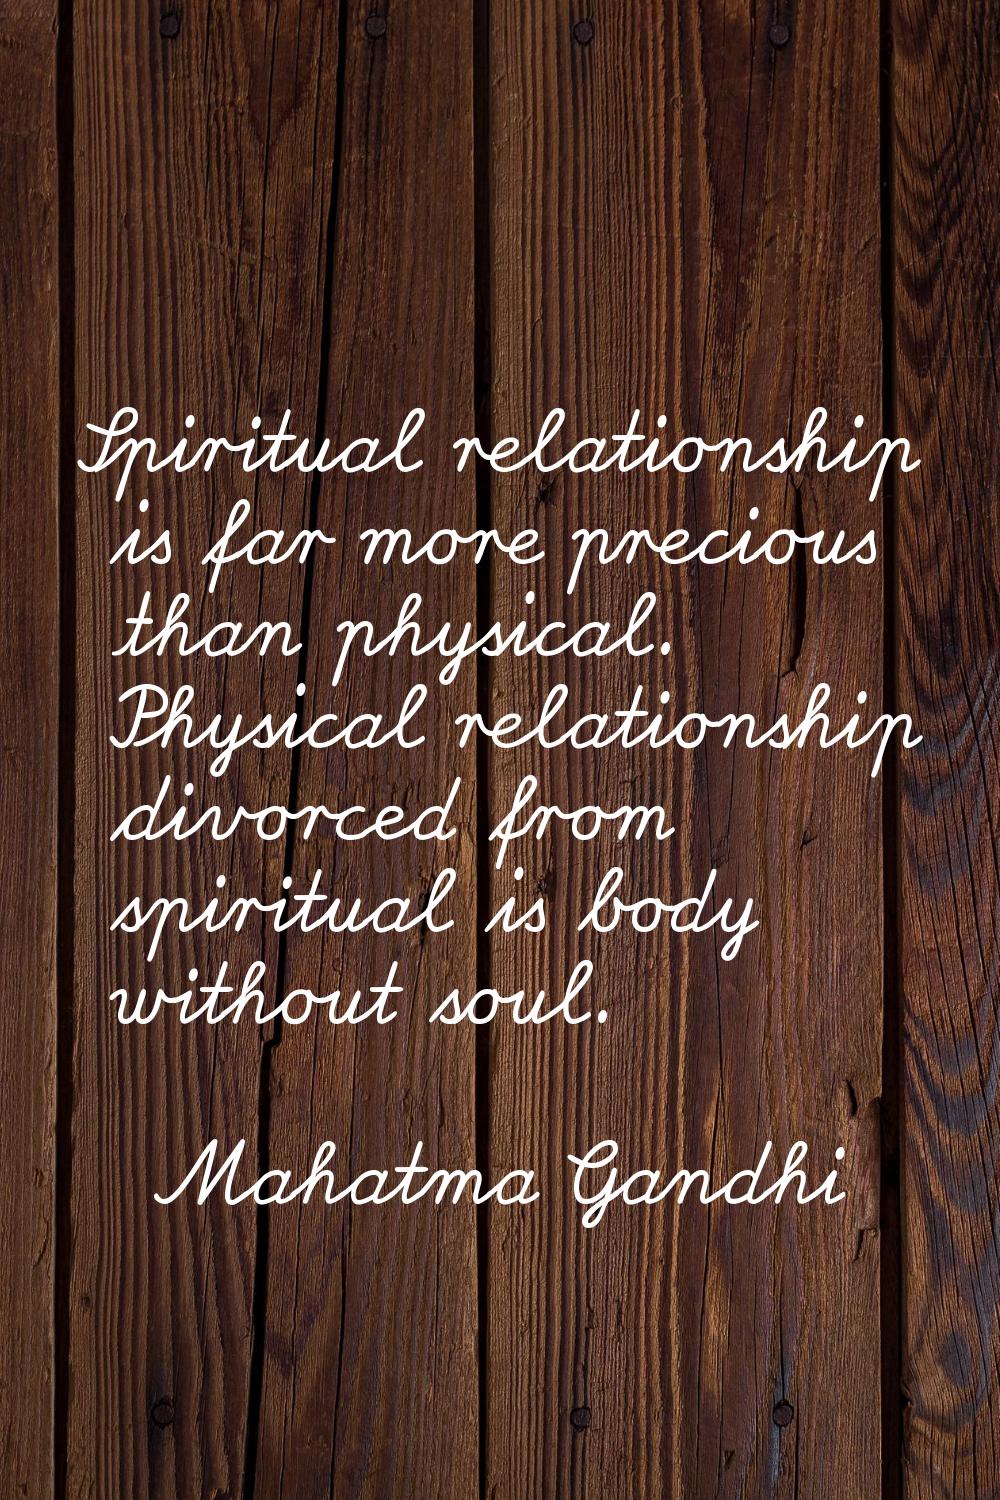 Spiritual relationship is far more precious than physical. Physical relationship divorced from spir